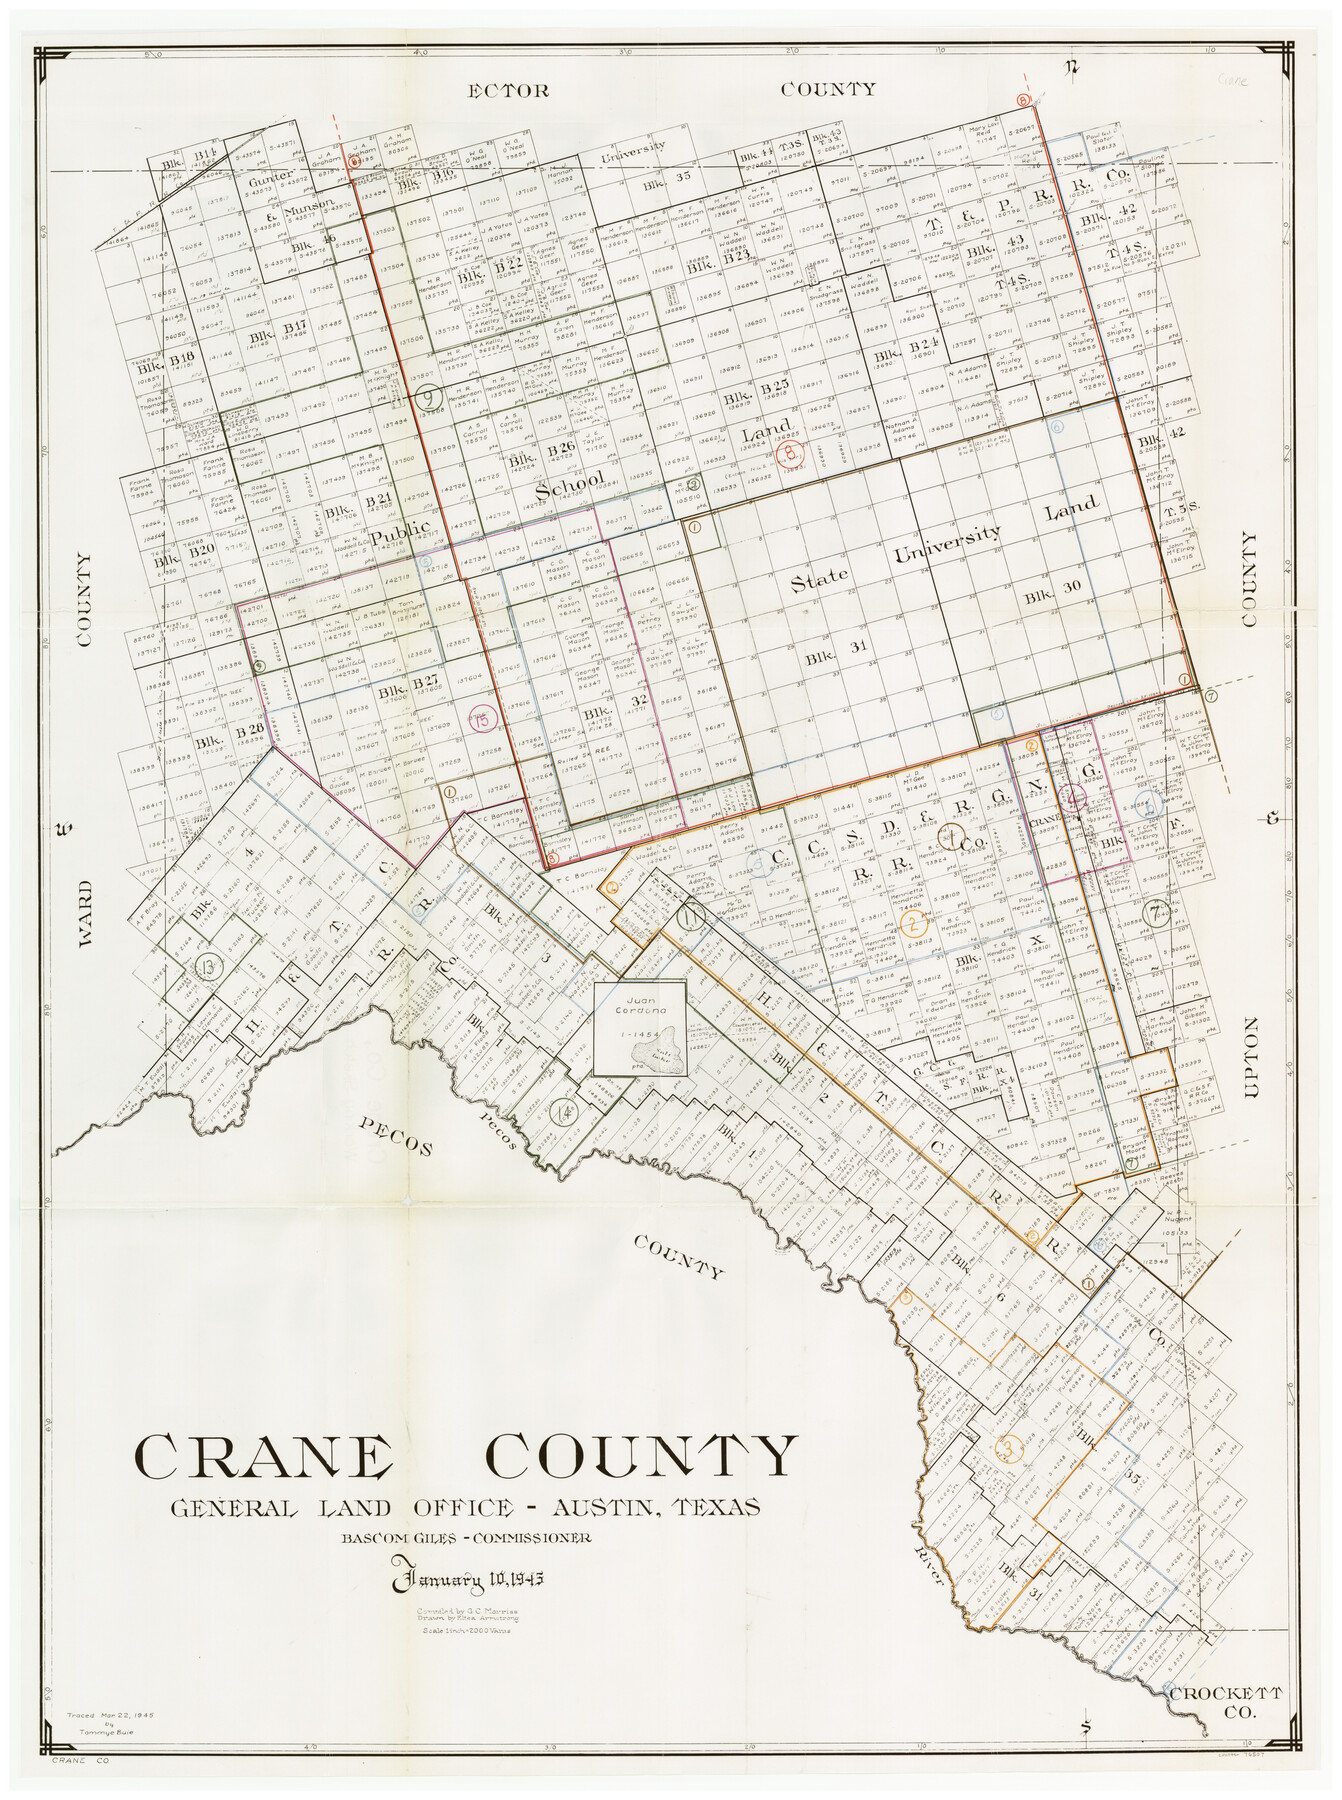 76507, Crane County Working Sketch Graphic Index, Sheet A, General Map Collection